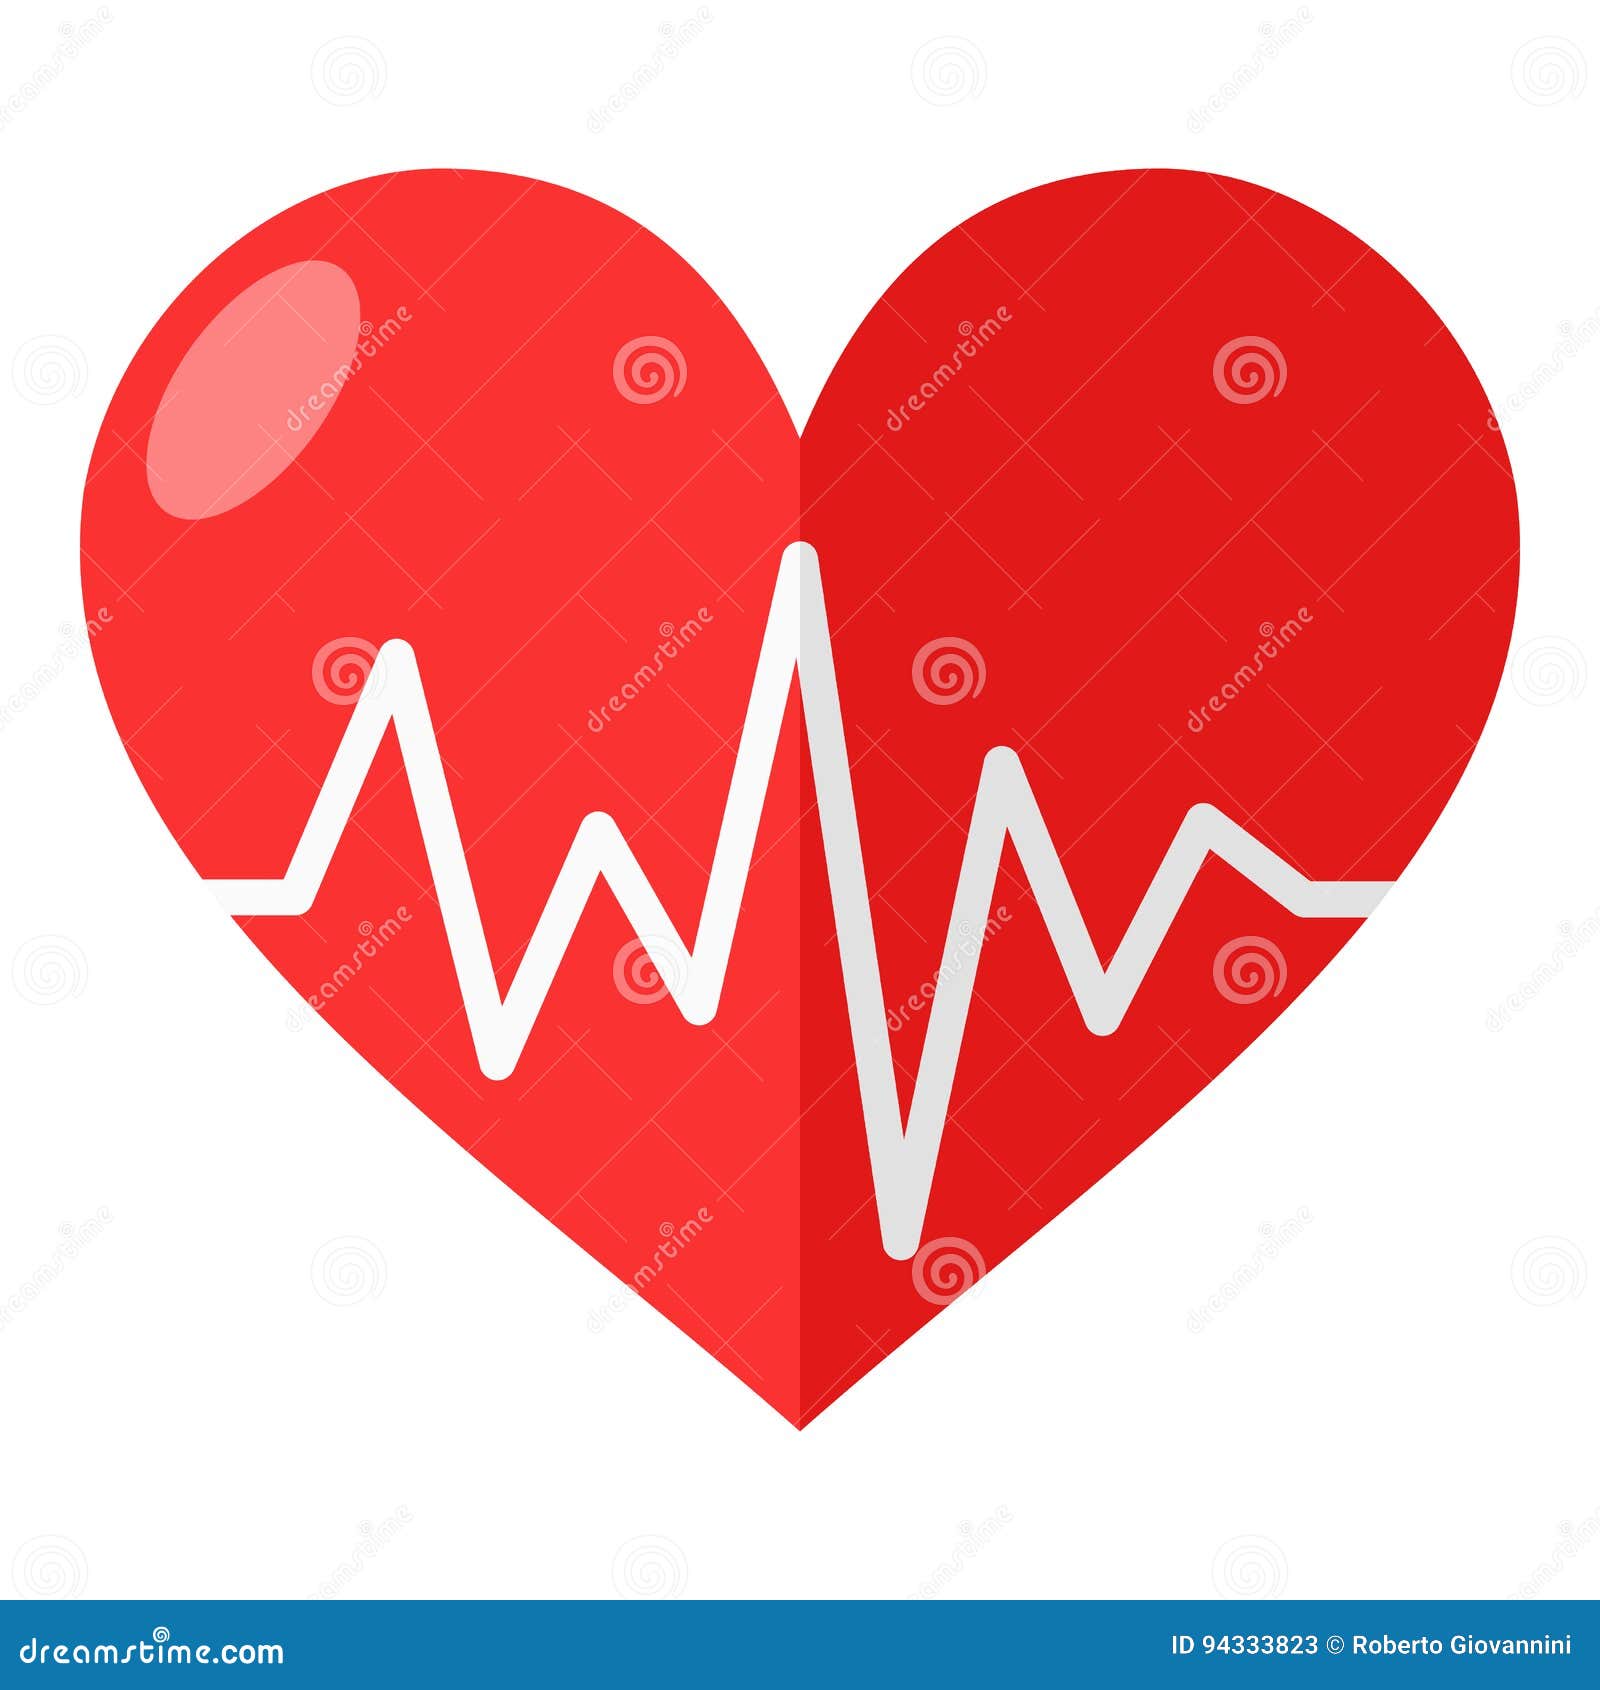 red heart with electrocardiogram flat icon